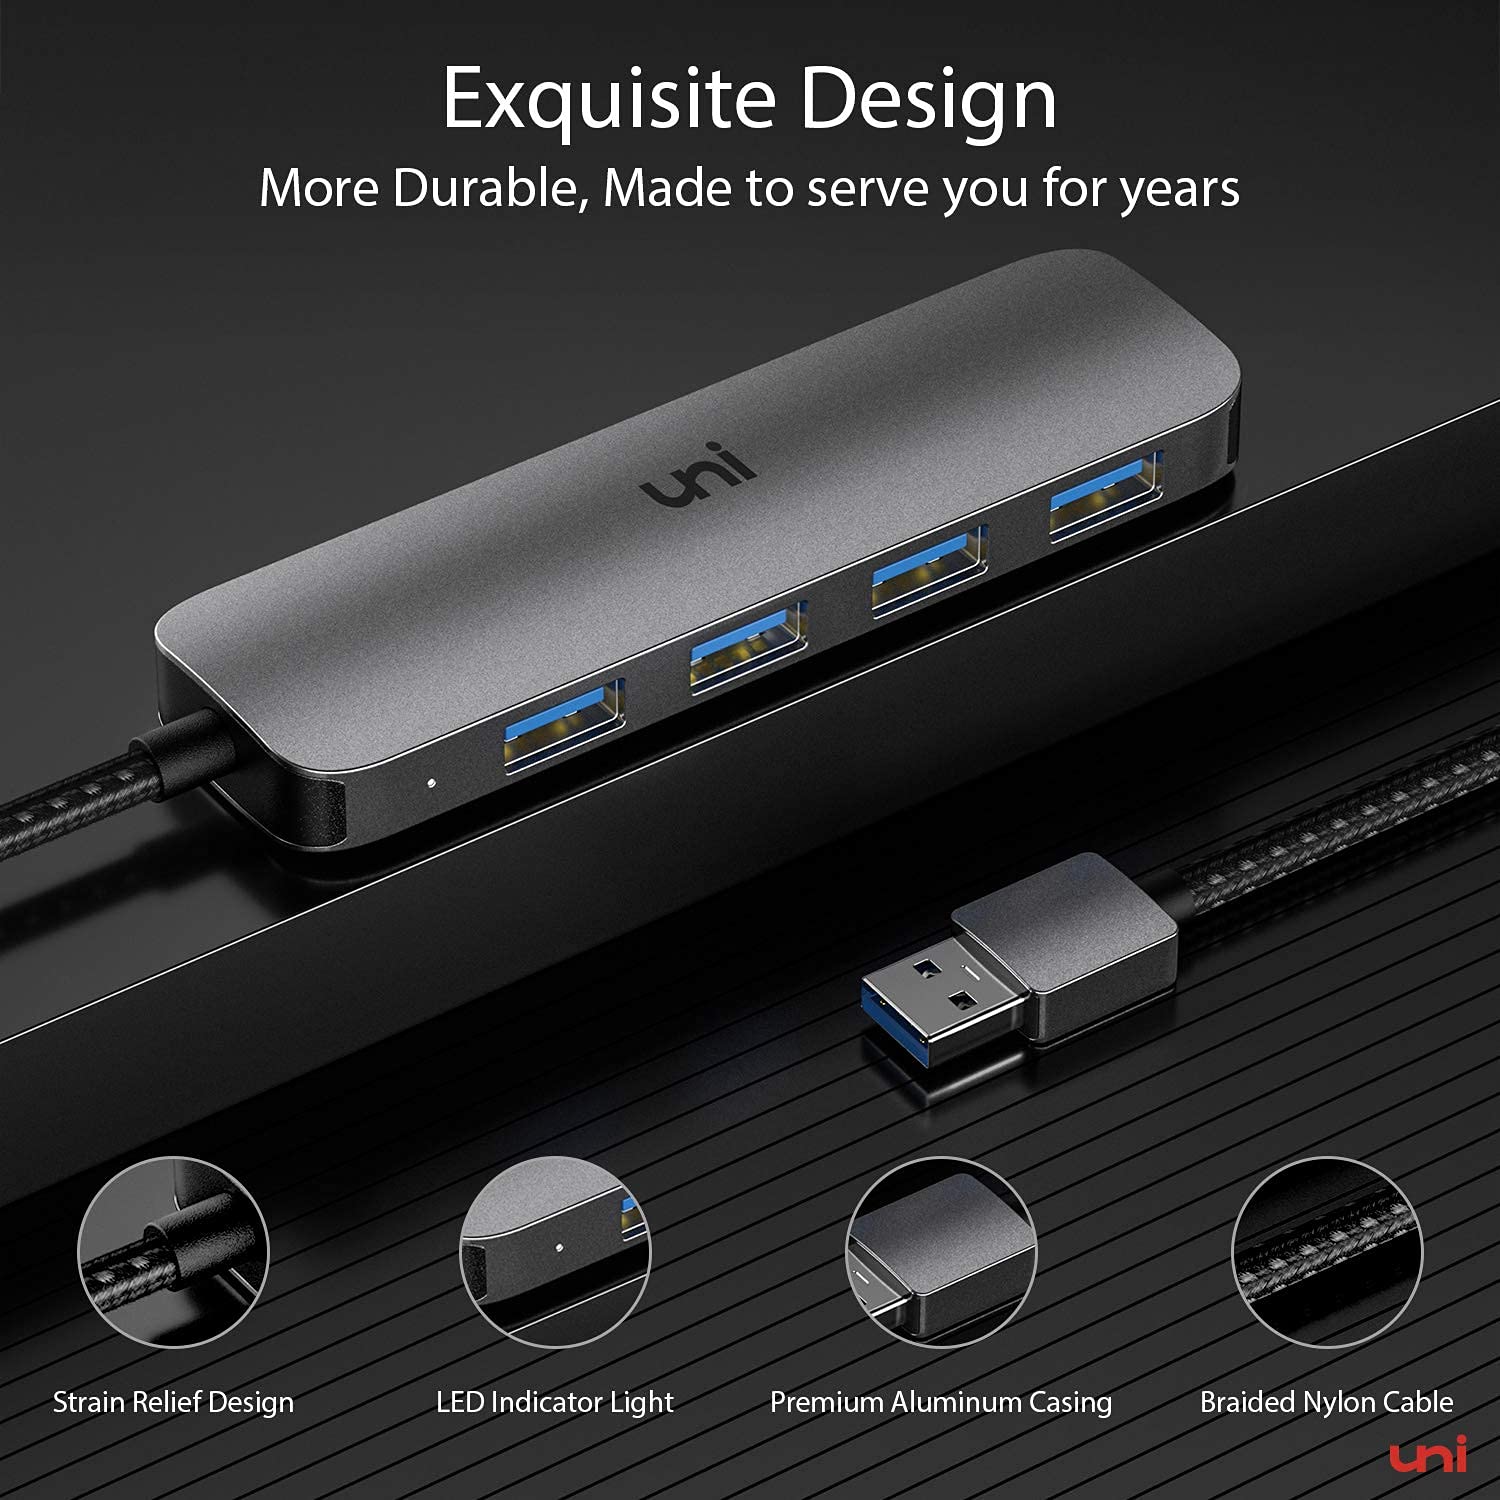 USB Hub 4-Port, uni USB 3.0 Data Hub Adapter with 4 ft Extended Cable, [Aluminum